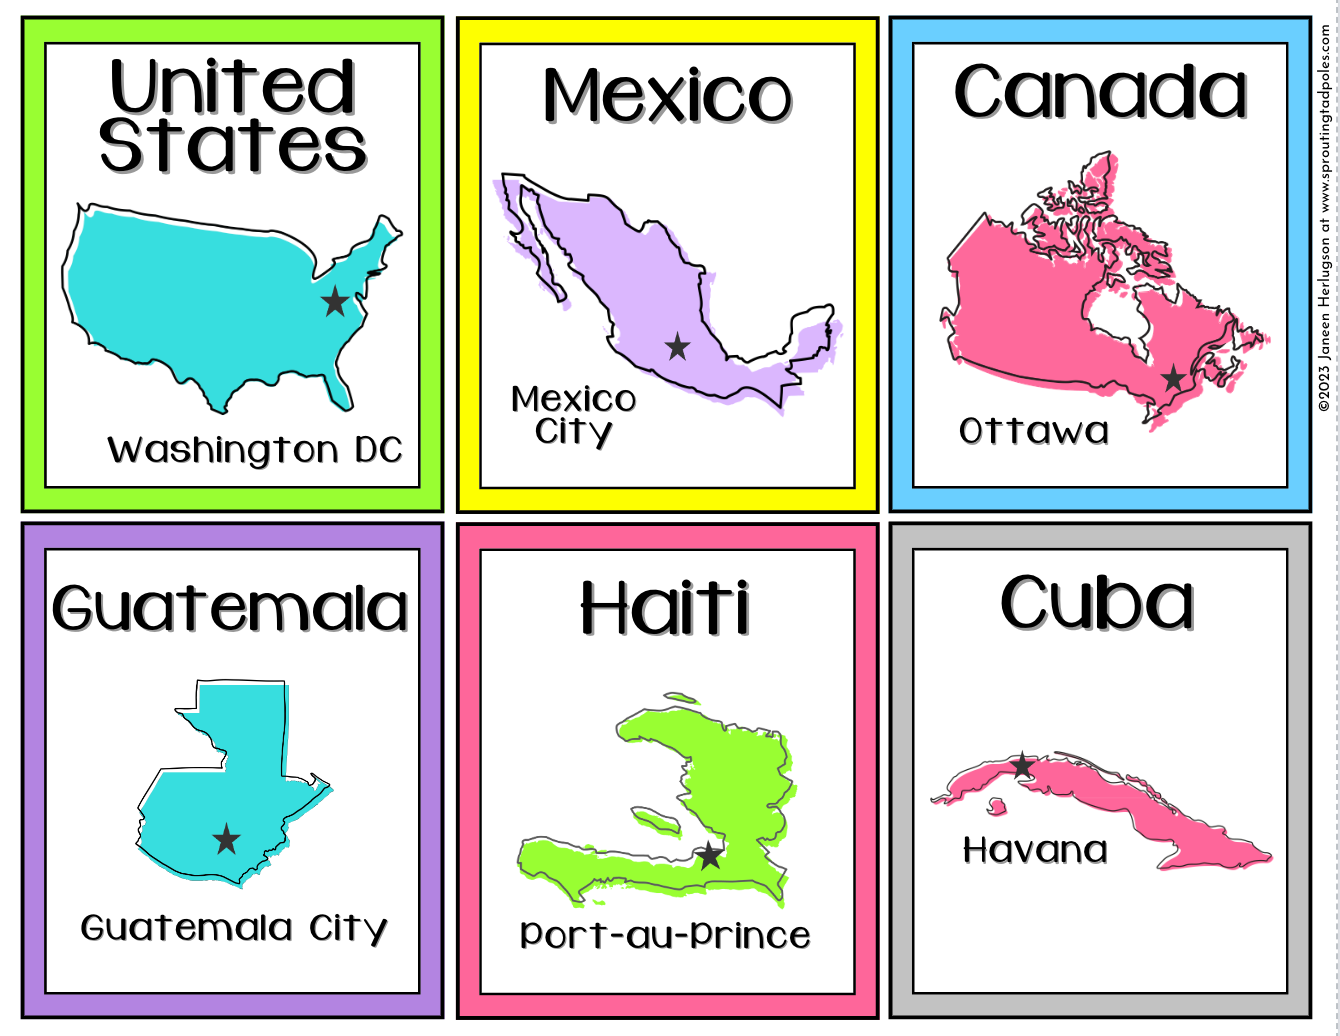 Countries of North America Memory Match Cards